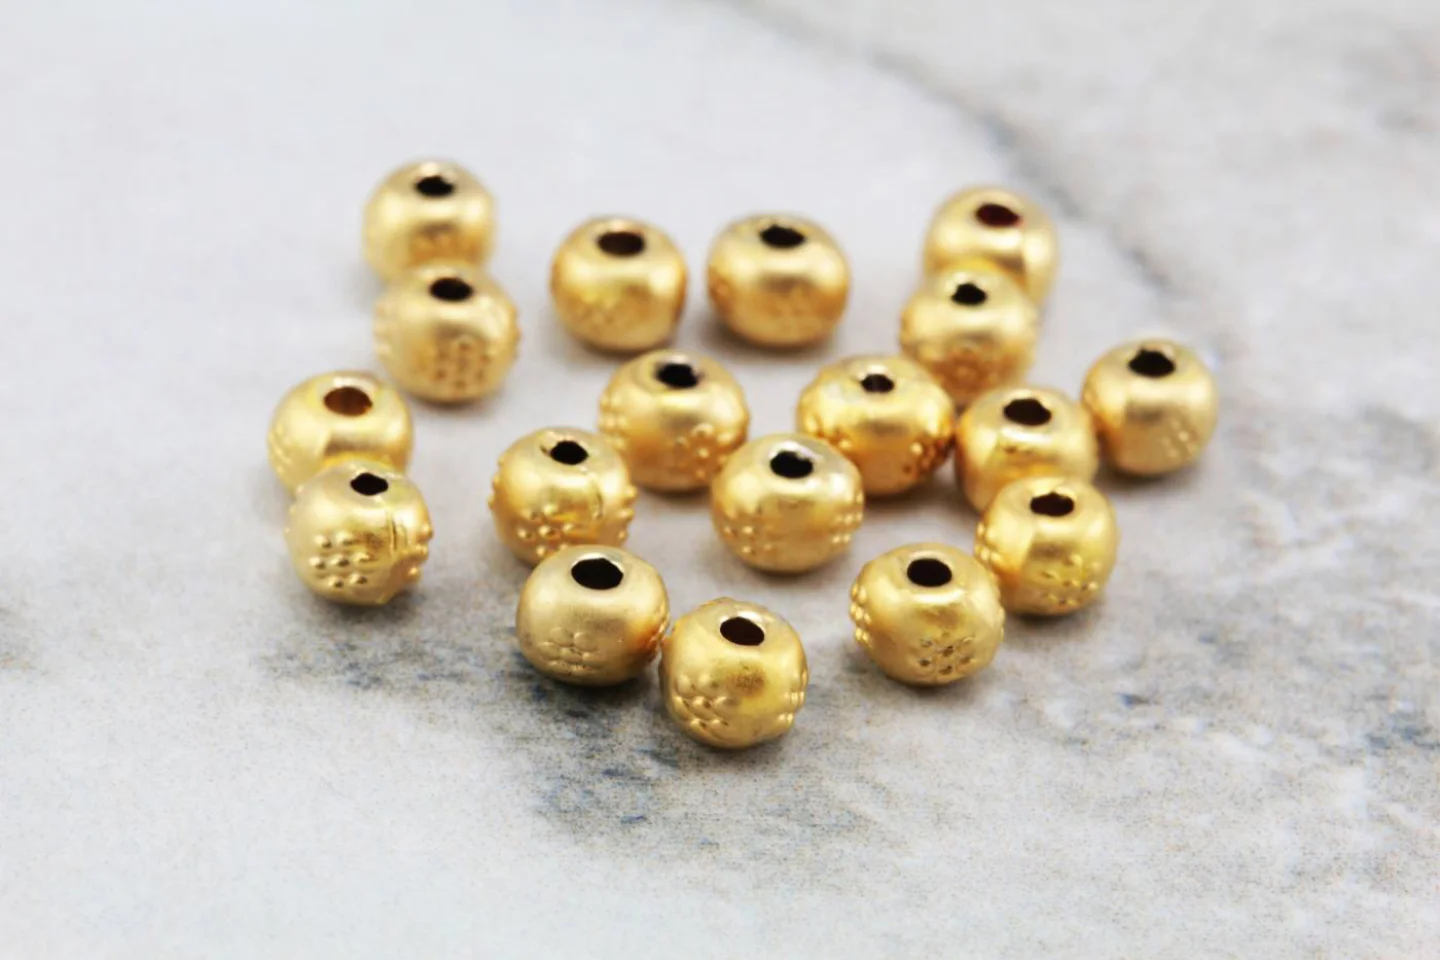 gold-tiny-round-5mm-spacer-bead-findings.